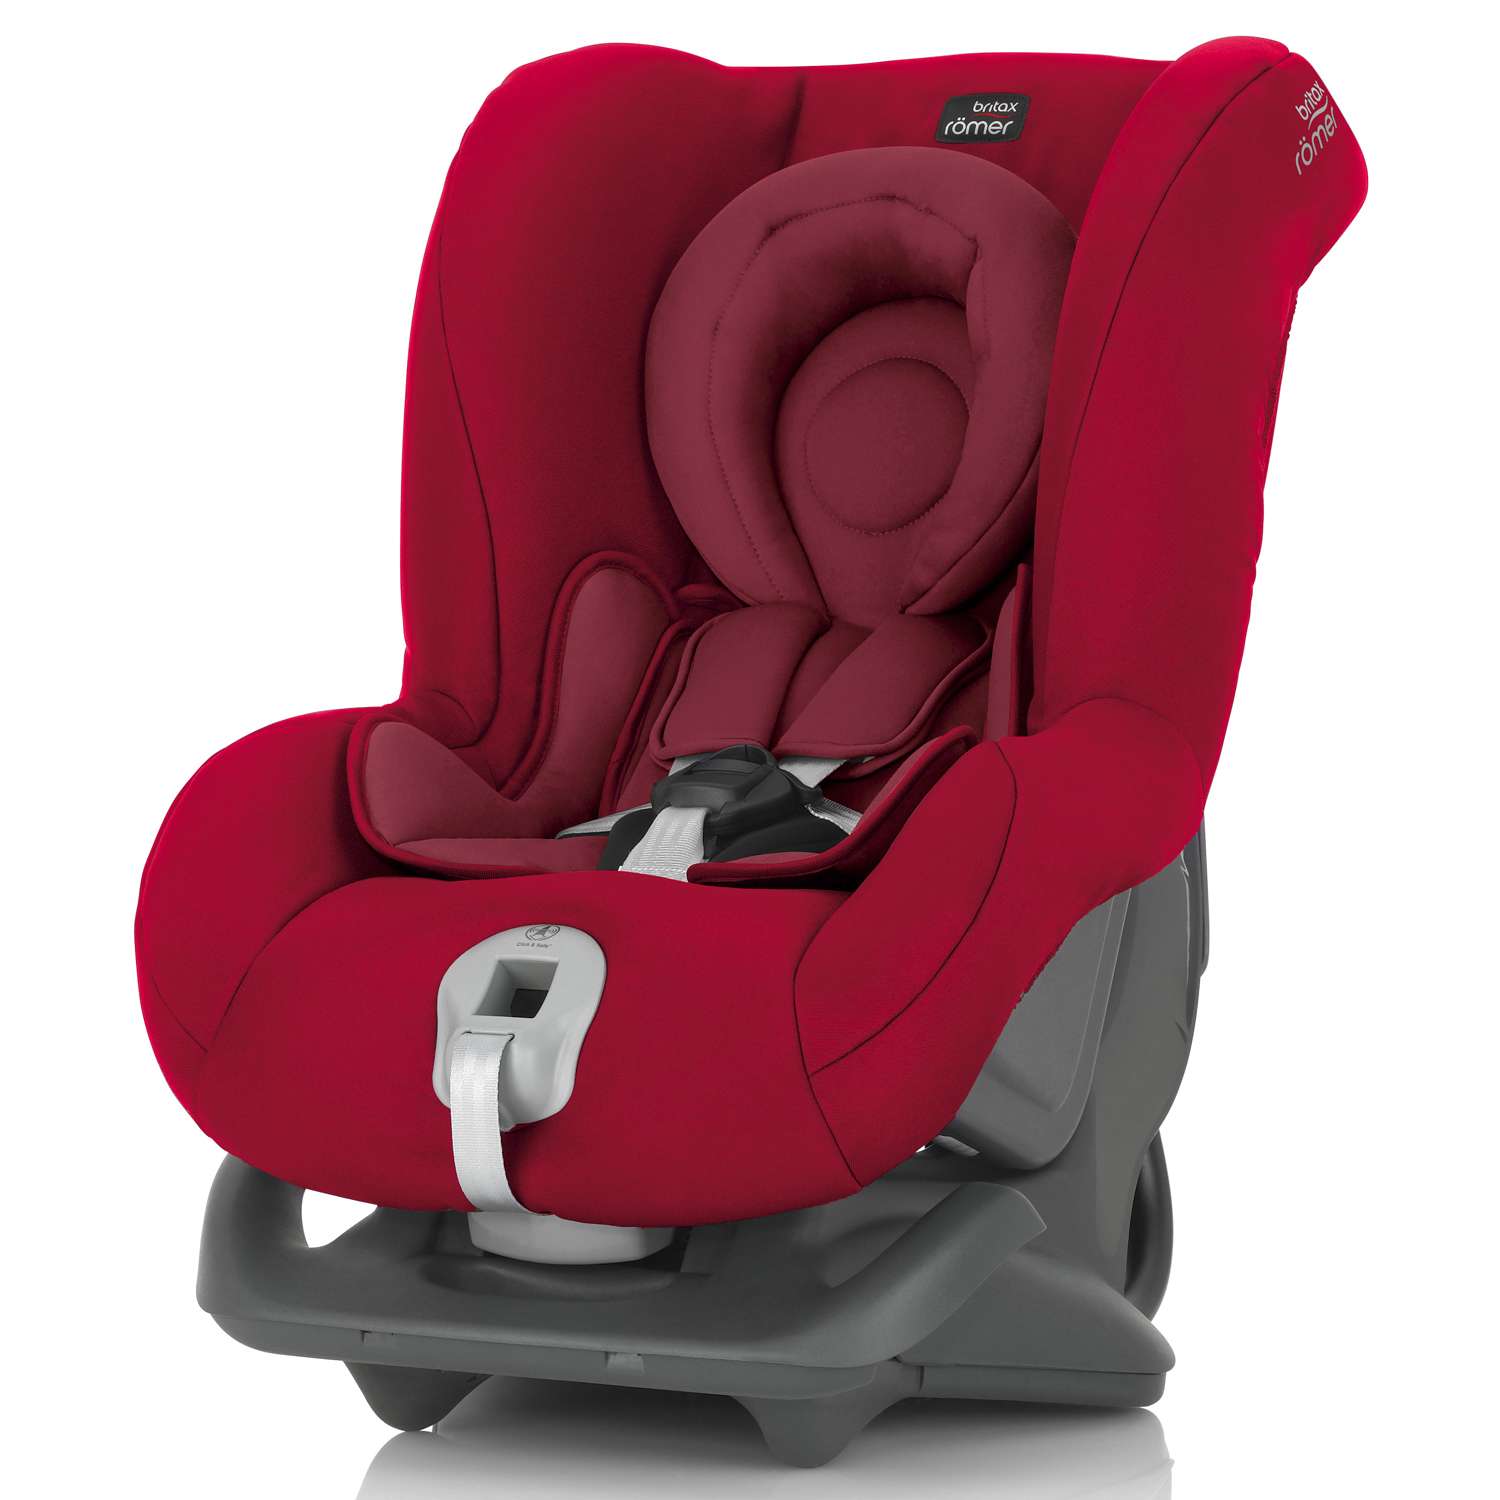 Автокресло Britax Roemer First Class Plus Flame Red - фото 1